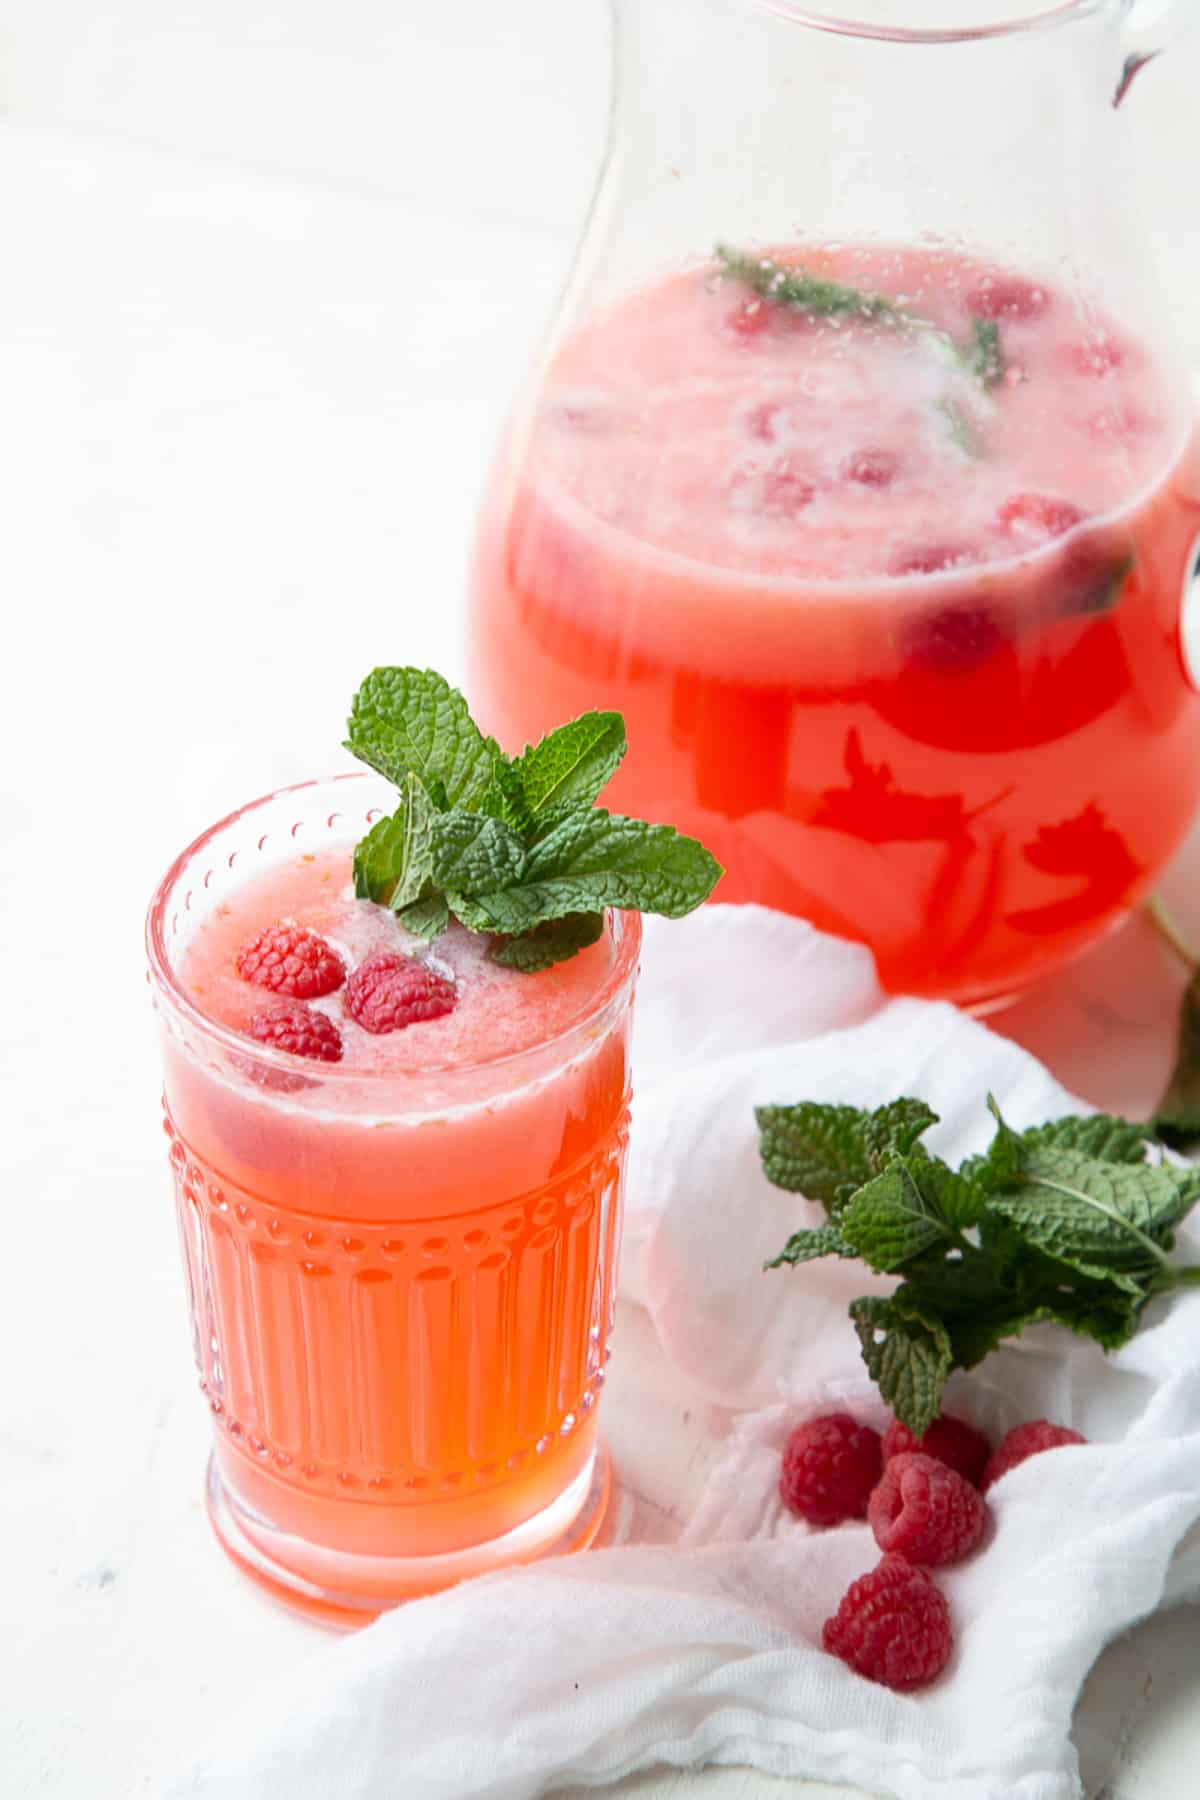 glass of raspberry lemonade garnished with mint, next to a pitcher of more raspberry lemonade.